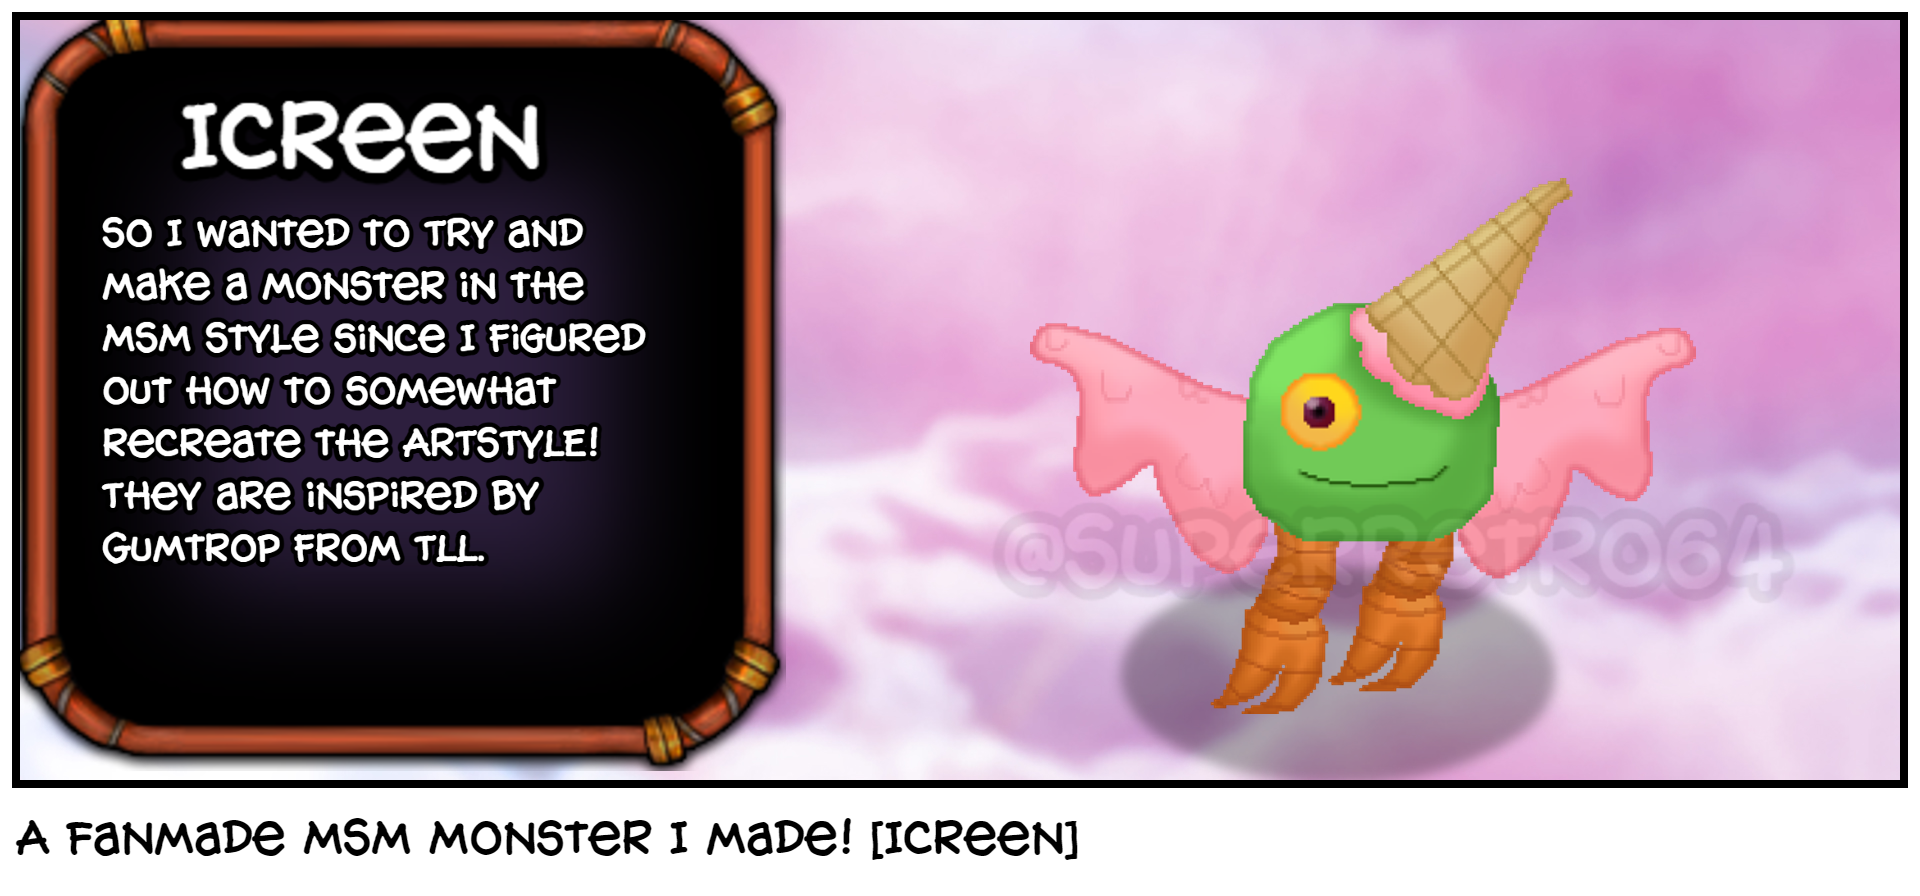 A Fanmade MSM Monster I made! [Icreen]